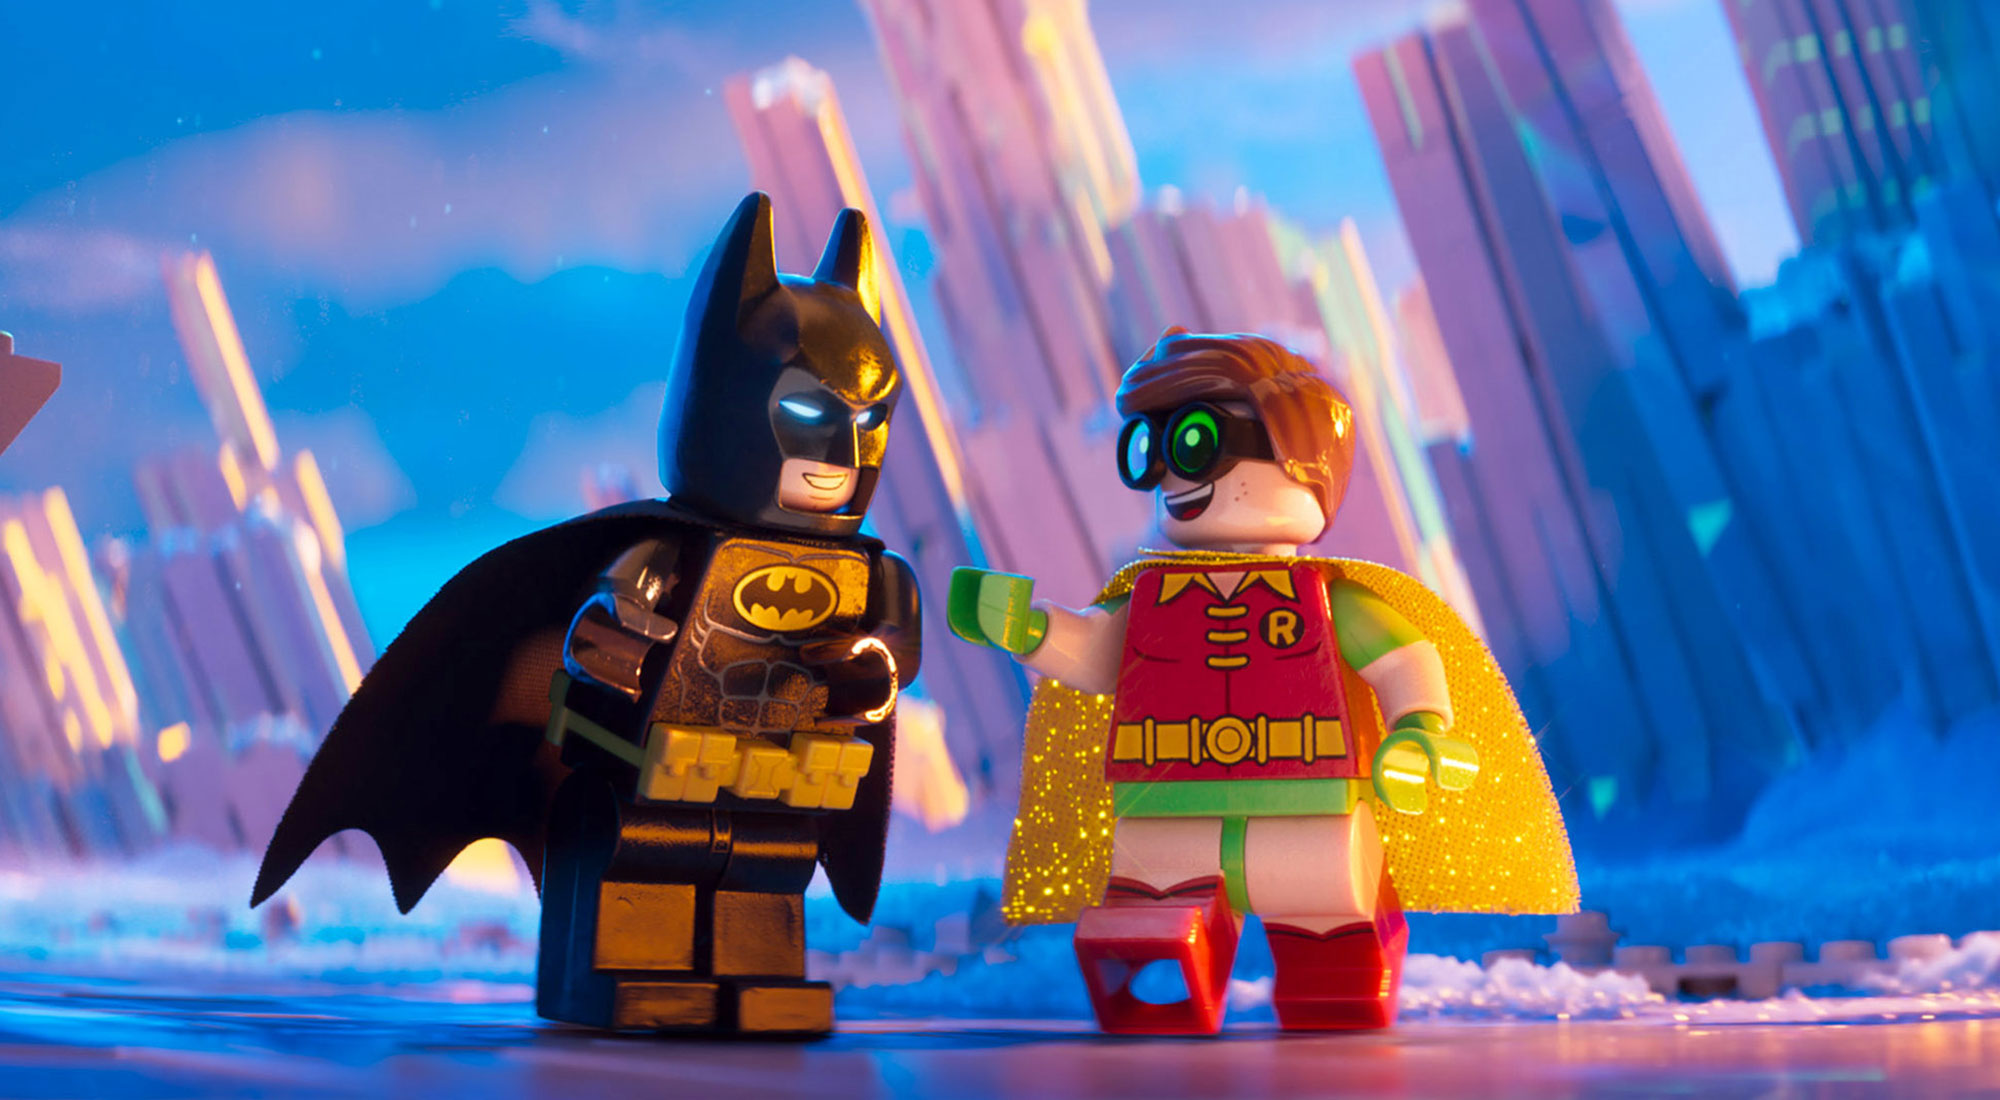 Lego Film to Universal, in Blow to Warner Bros. - Bloomberg